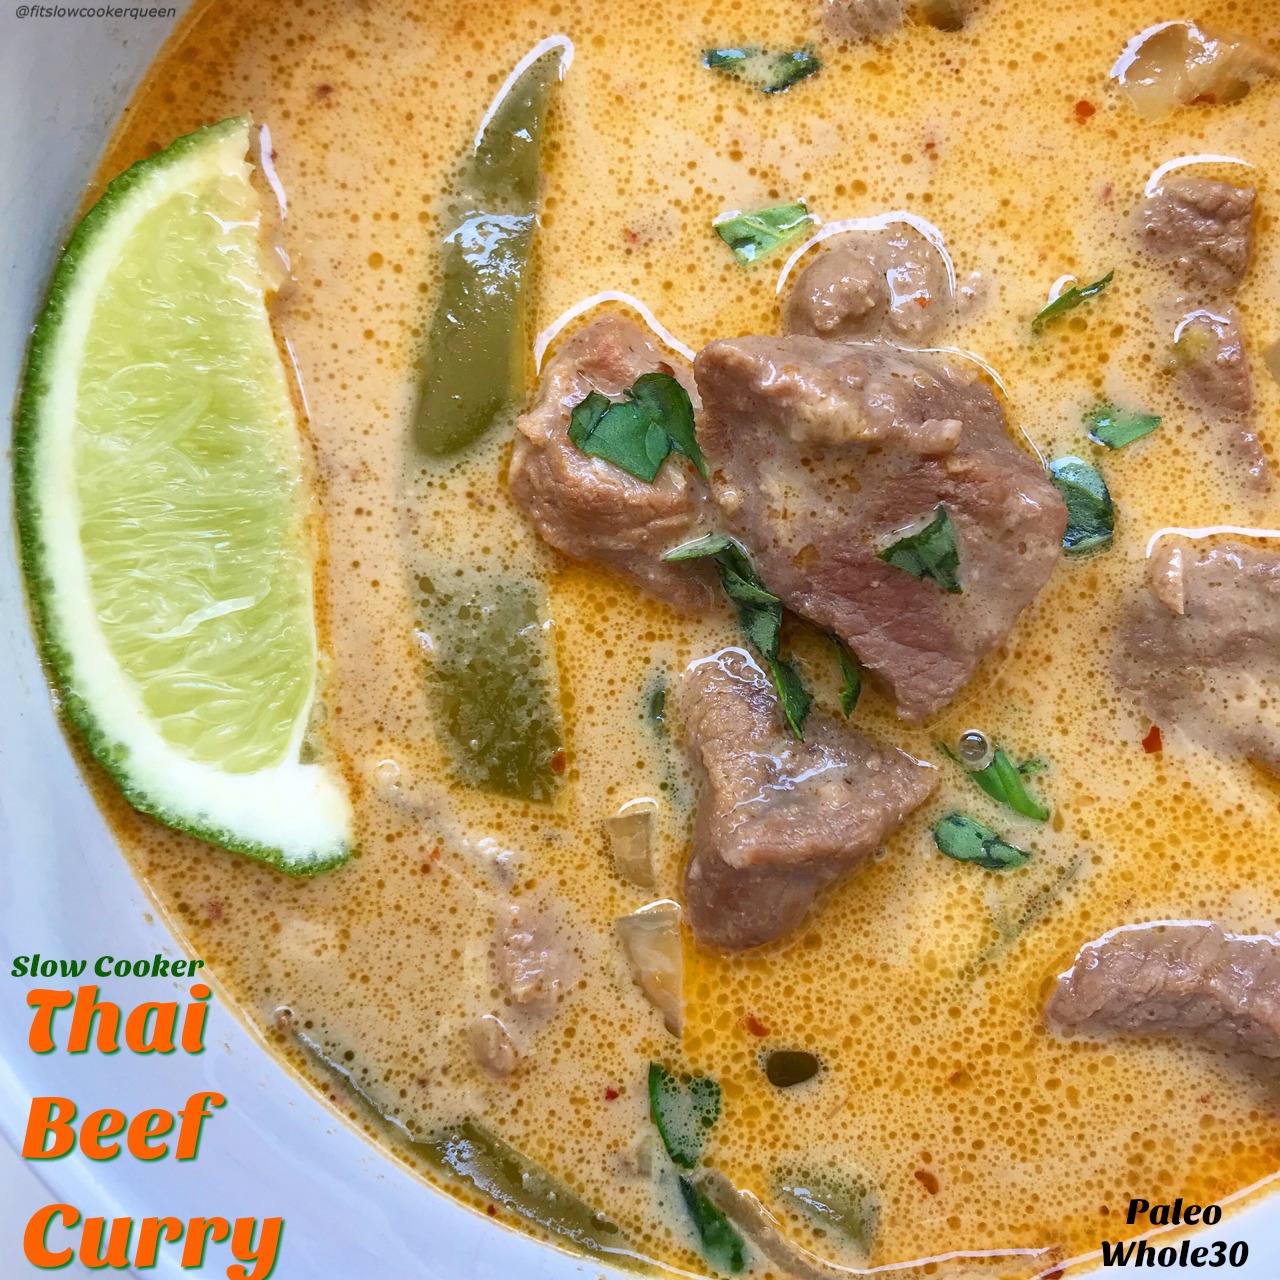 This easy Thai beef curry recipe is all about the healthy, homemade coconut-curry sauce. It's low-sodium, vegan, paleo, whole30, etc. Just add protein, vegetables of your choice, and let your slow cooker do the work.